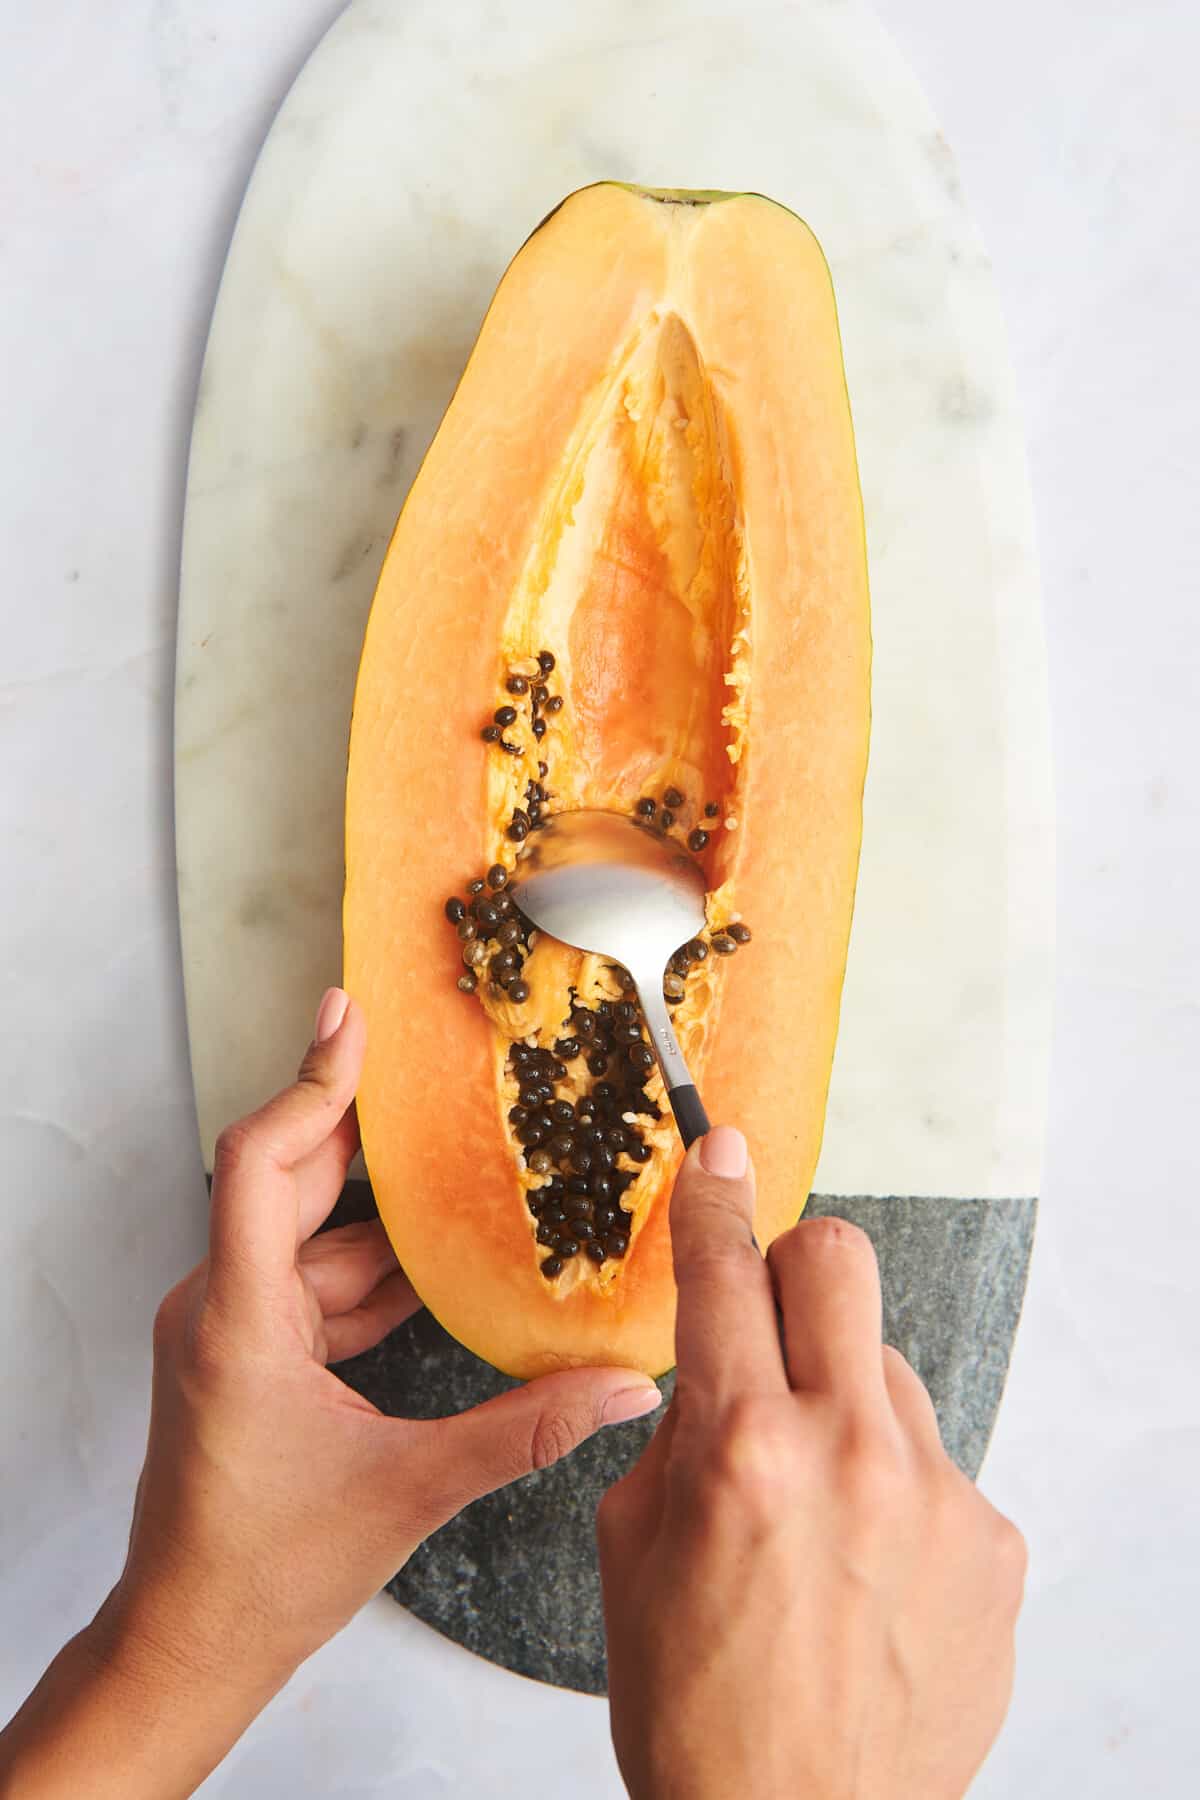 Two hands scooping out the black seeds of a papaya. 